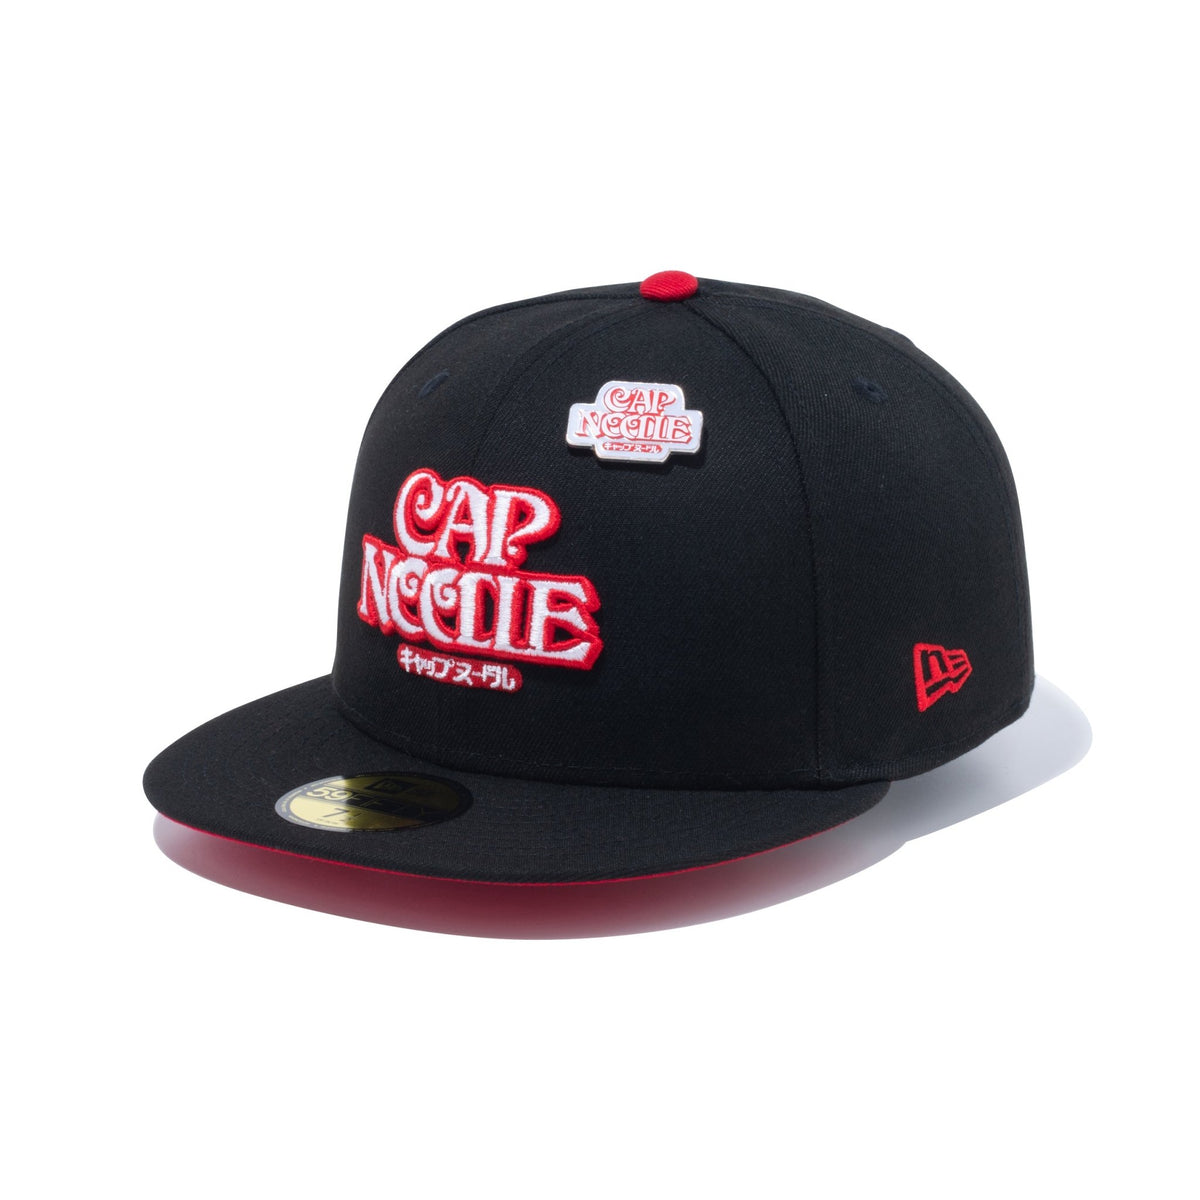 59FIFTY CUP NOODLE カップヌードル CAP NOODLE ブラック